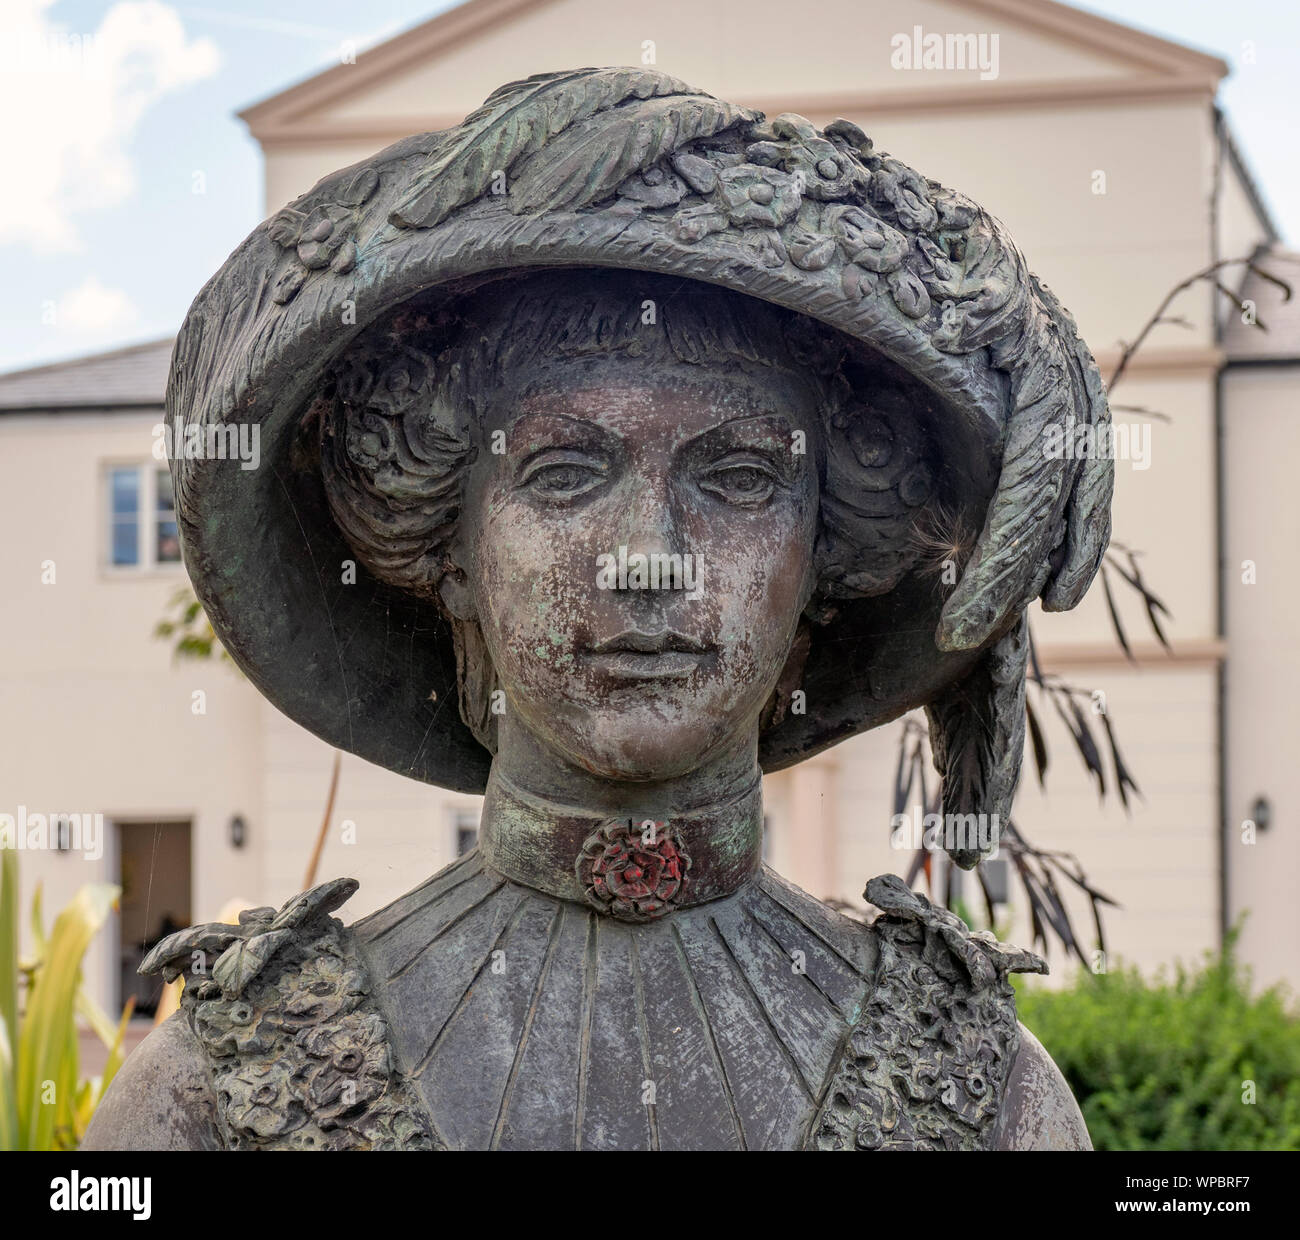 Detail of statue of Lillie Langtry in Lillie Langtry Gardens, Jersey, Channel Islands. Stock Photo